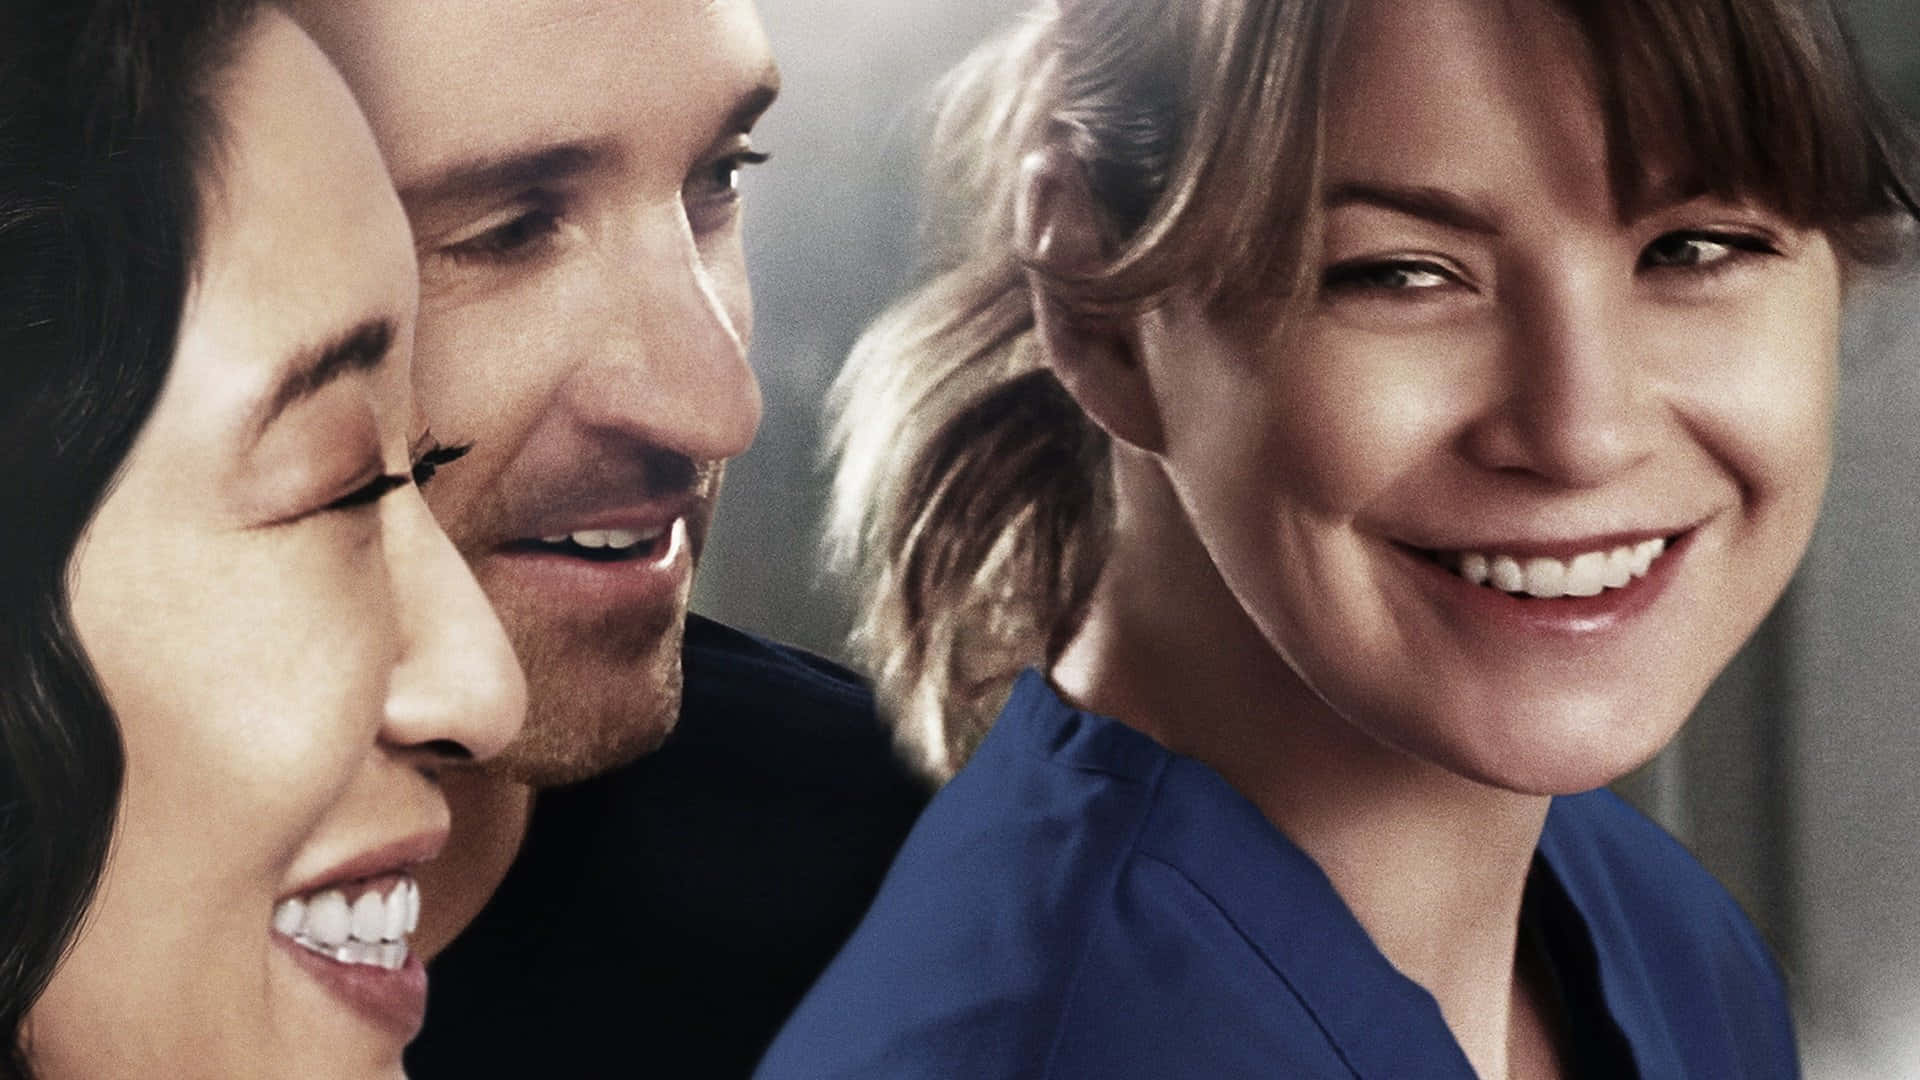 Follow the Trials and Tribulations of Meredith Grey